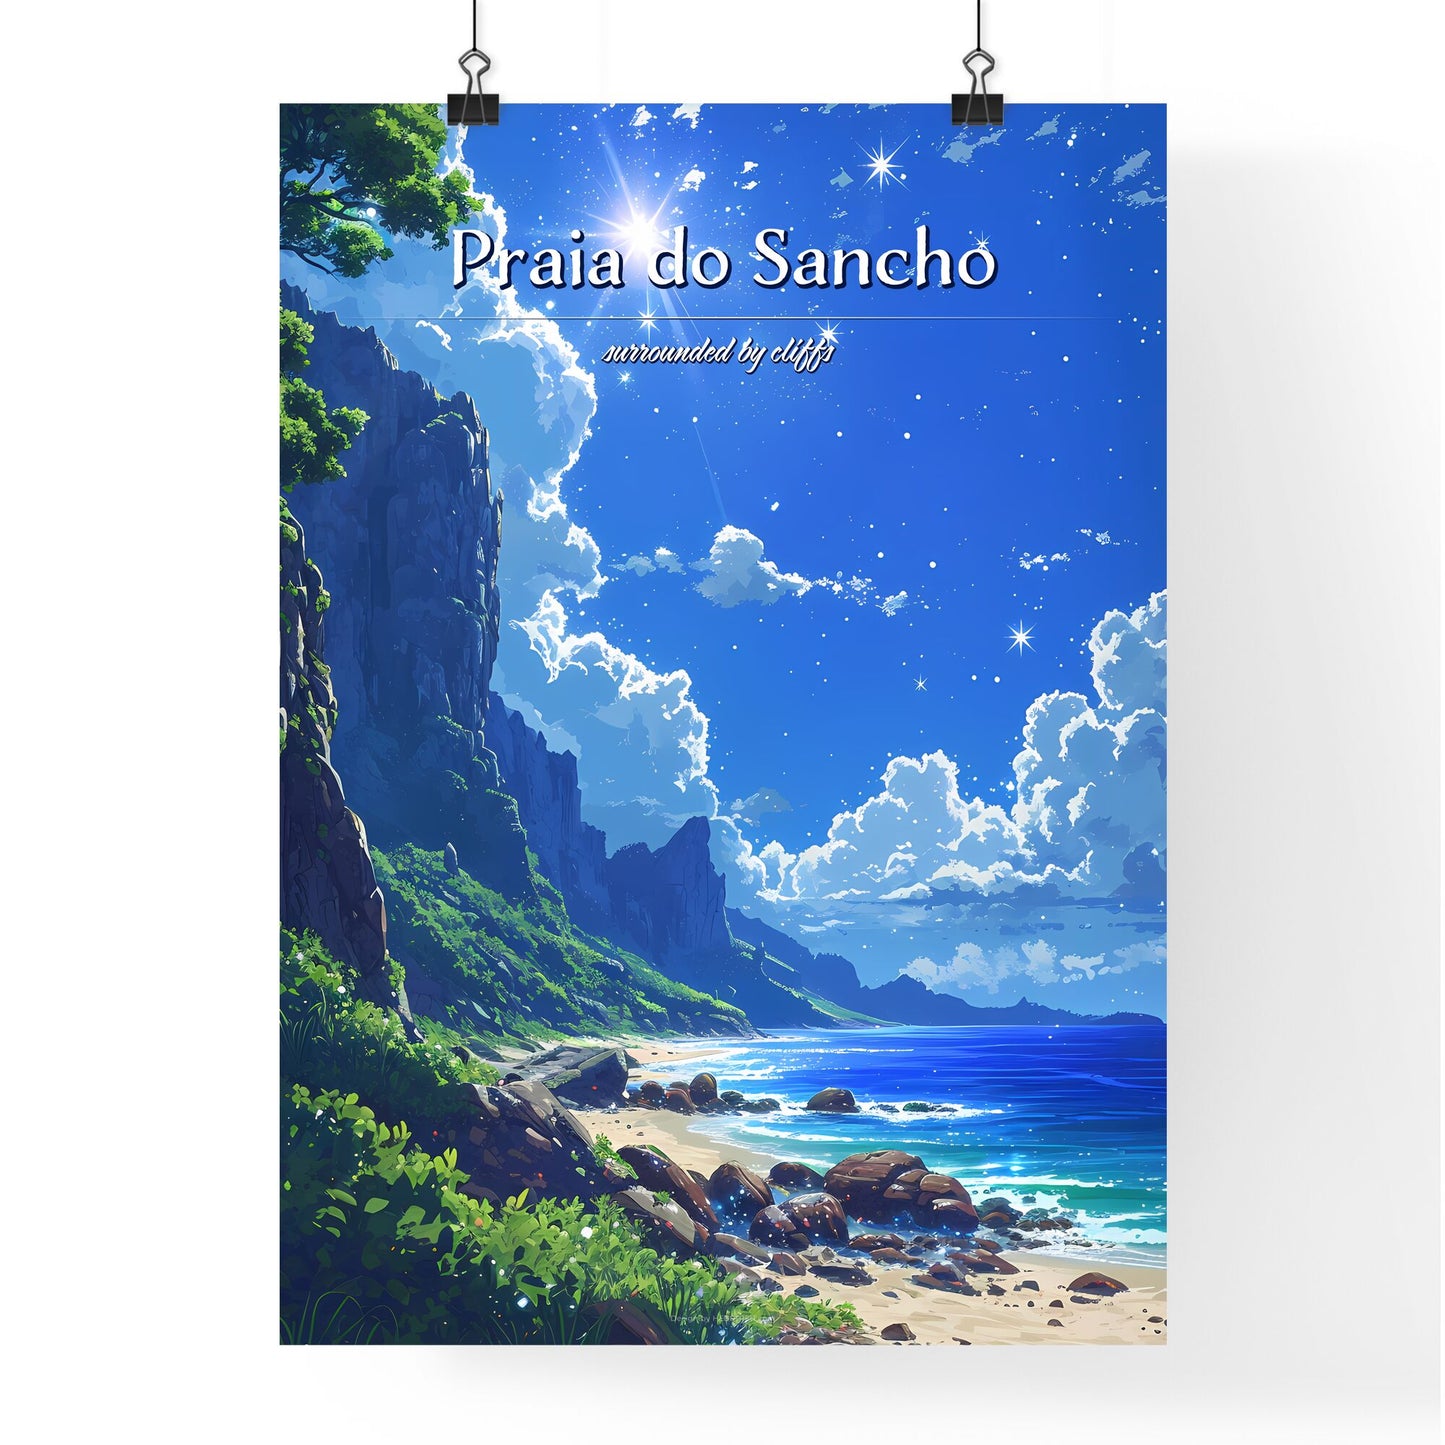 Praia do Sancho Beach - Art print of a beach with rocks and a body of water and a bright star Default Title